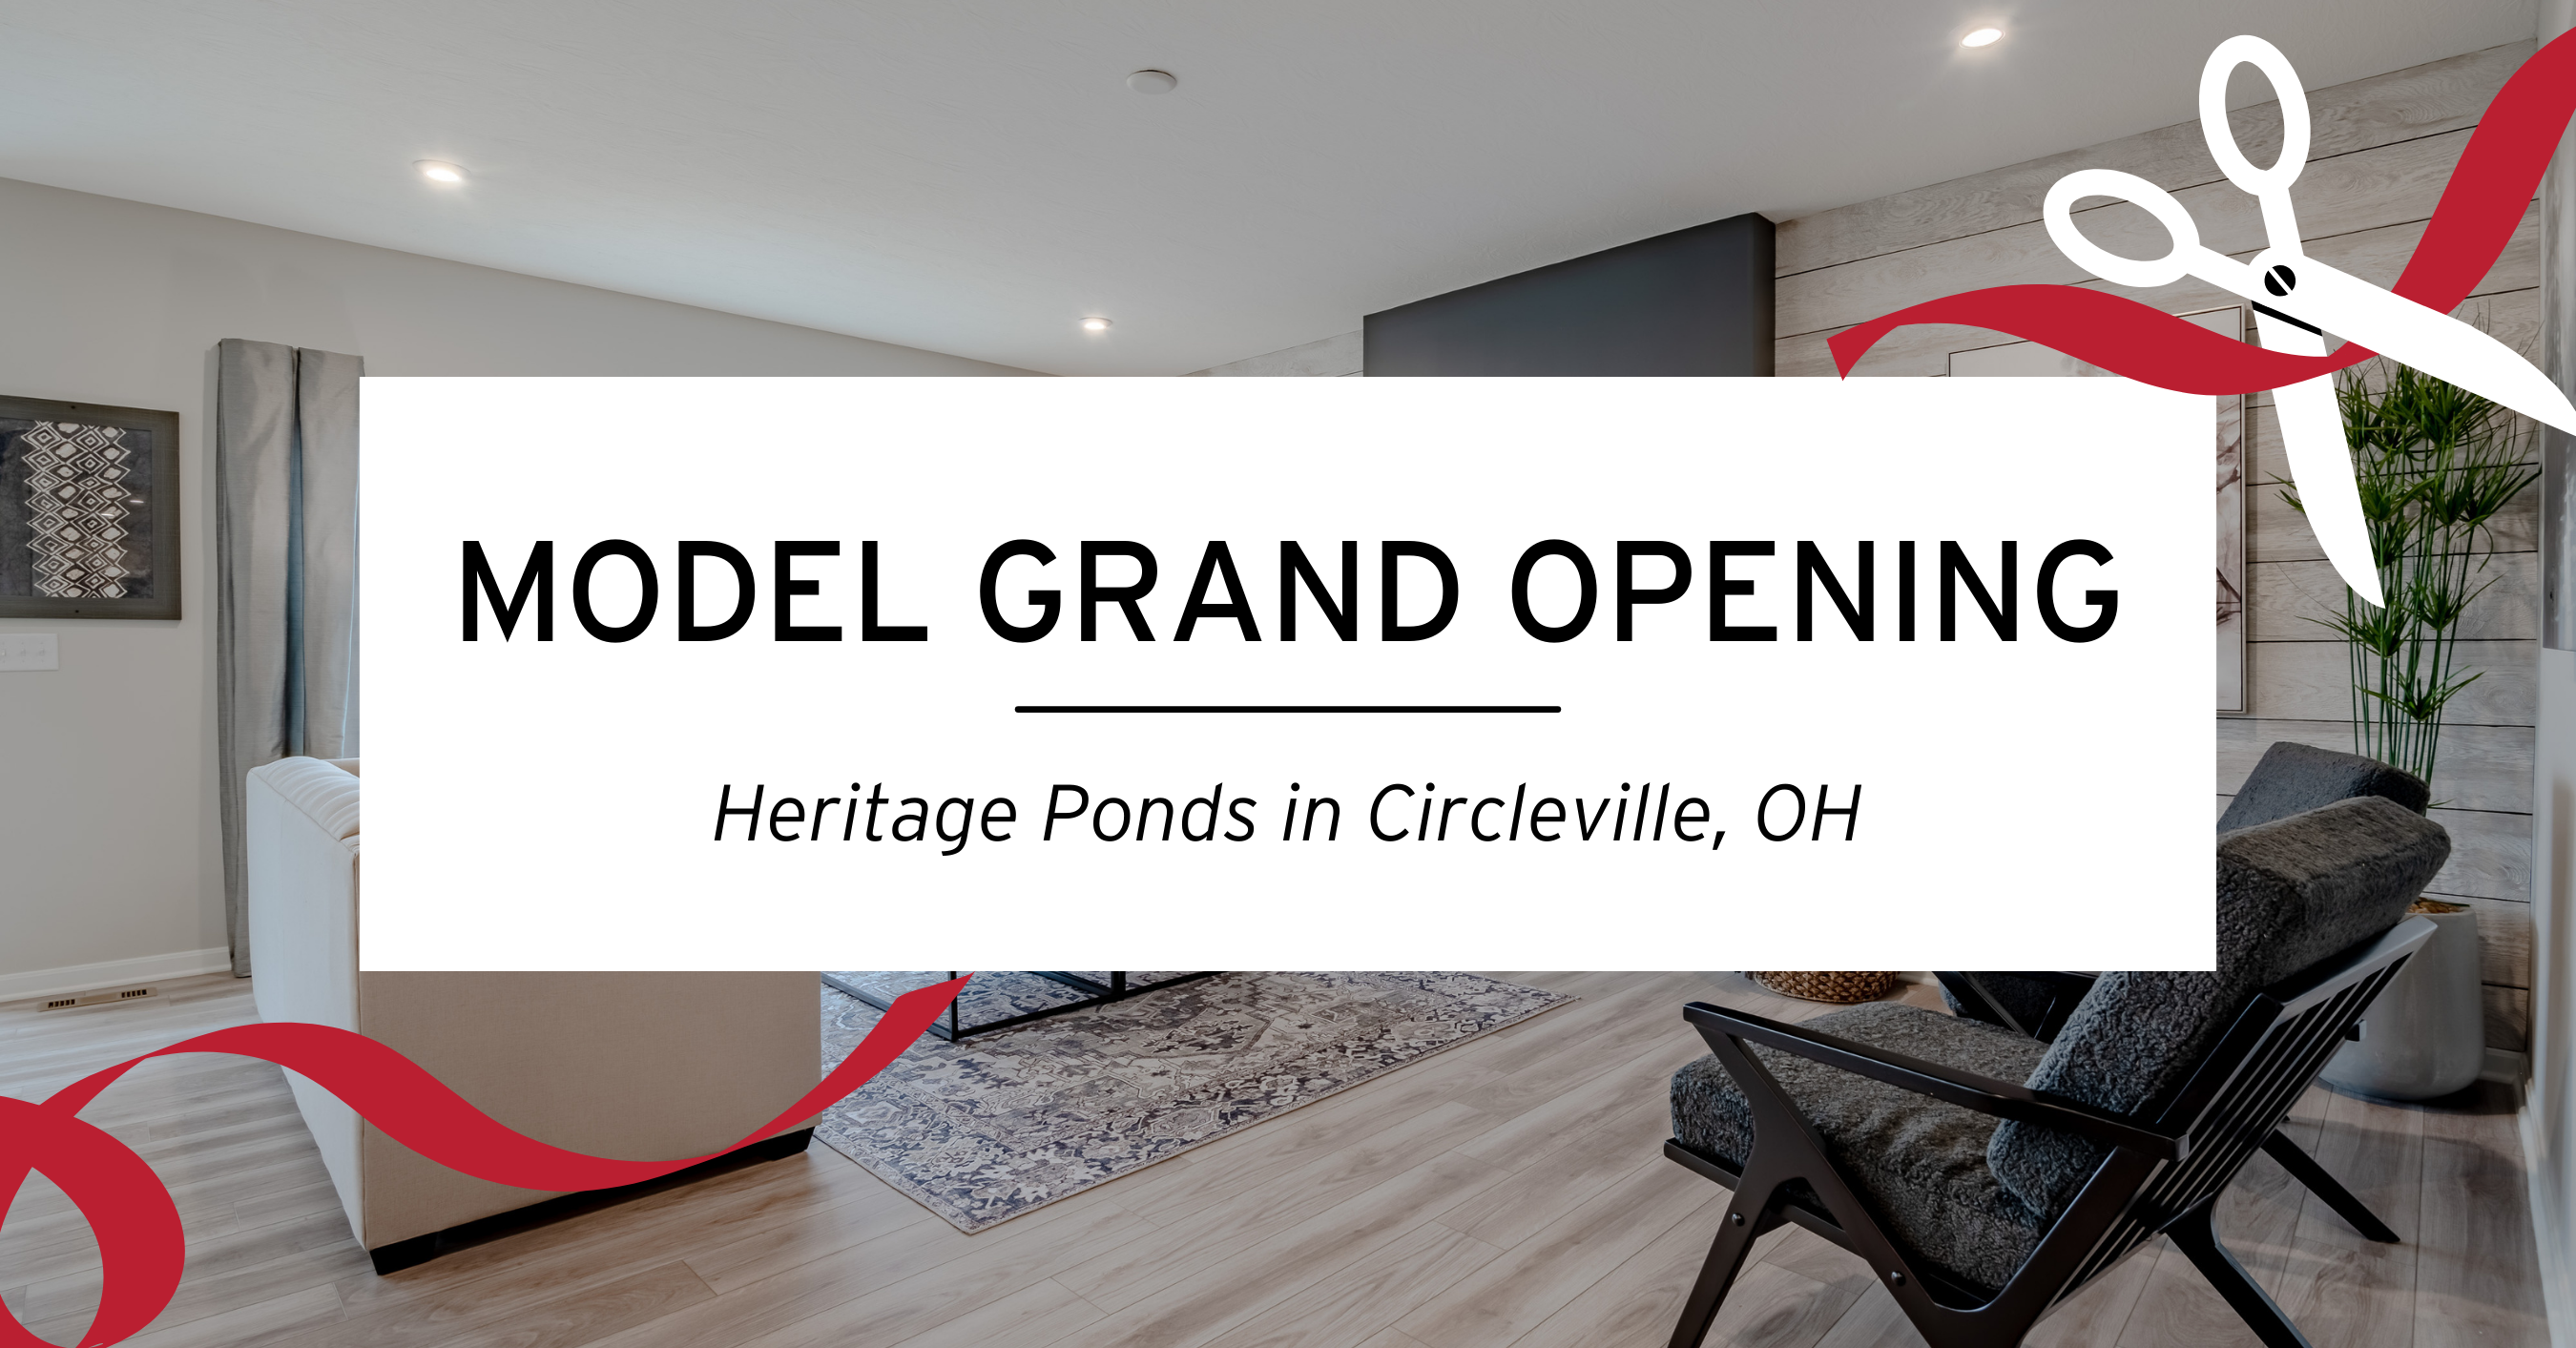 Model Grand Opening Event in Circleville, OH!